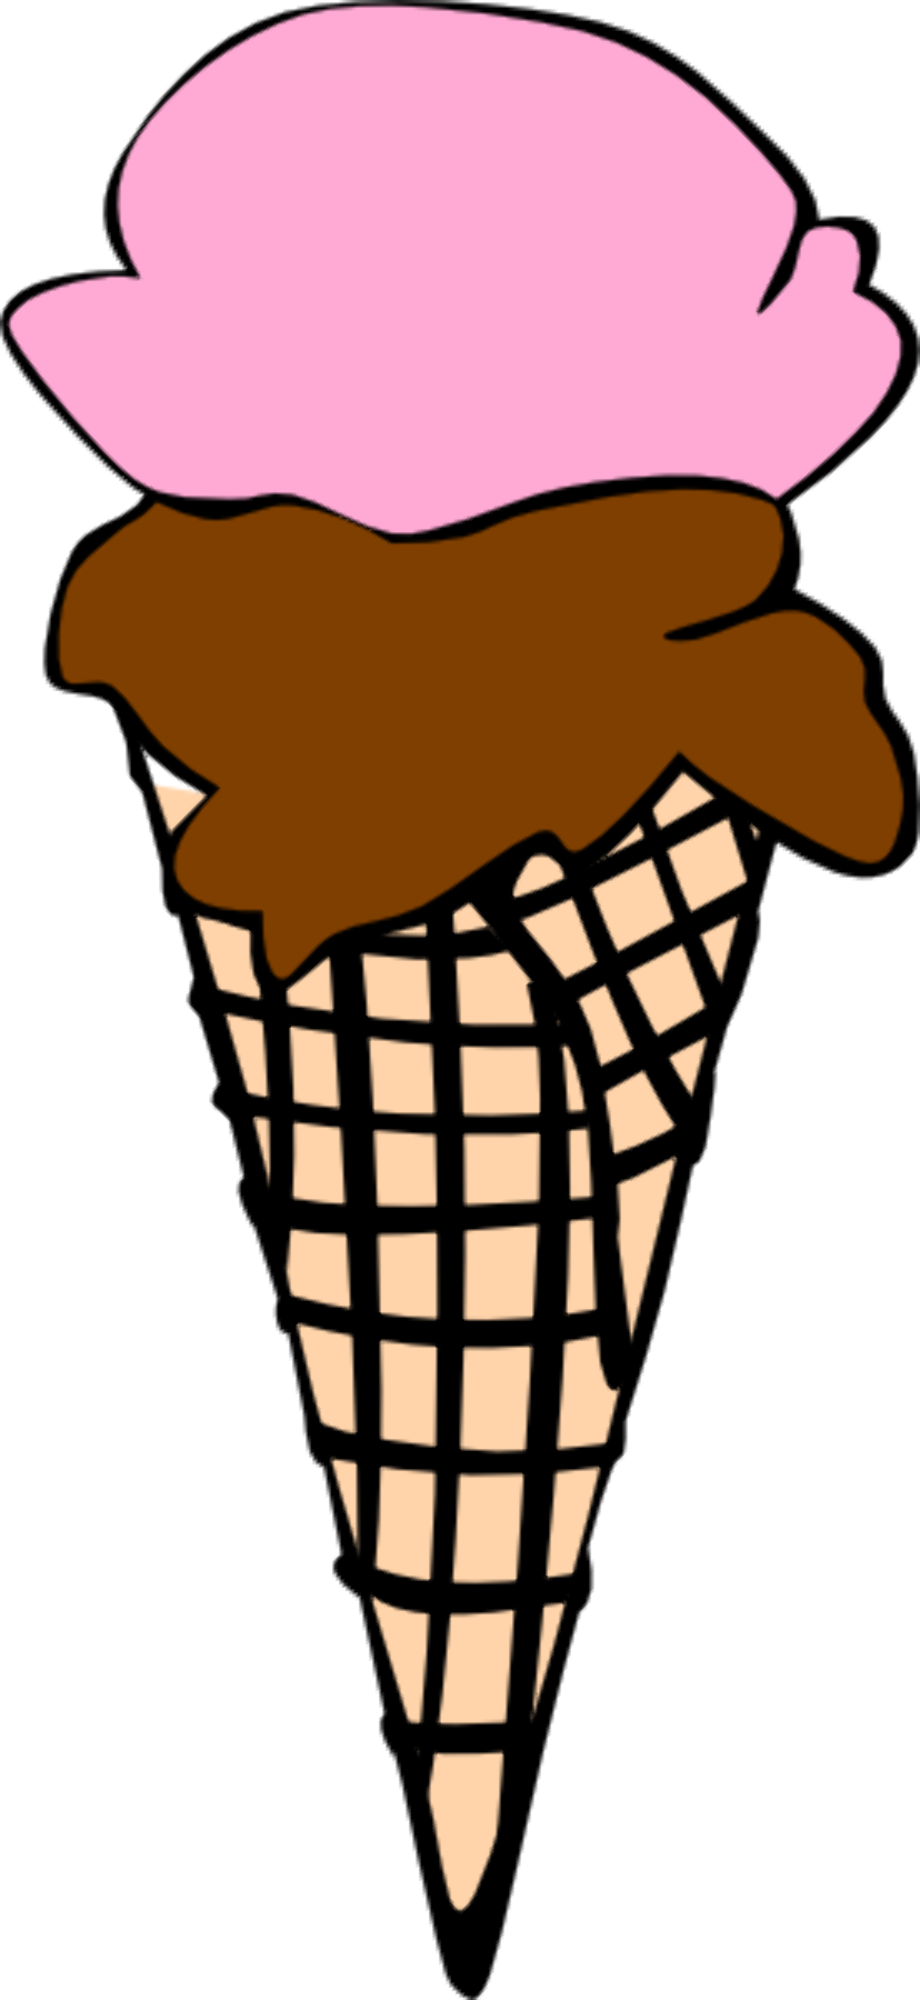 Download High Quality ice cream cone clip art colorful Transparent PNG ...